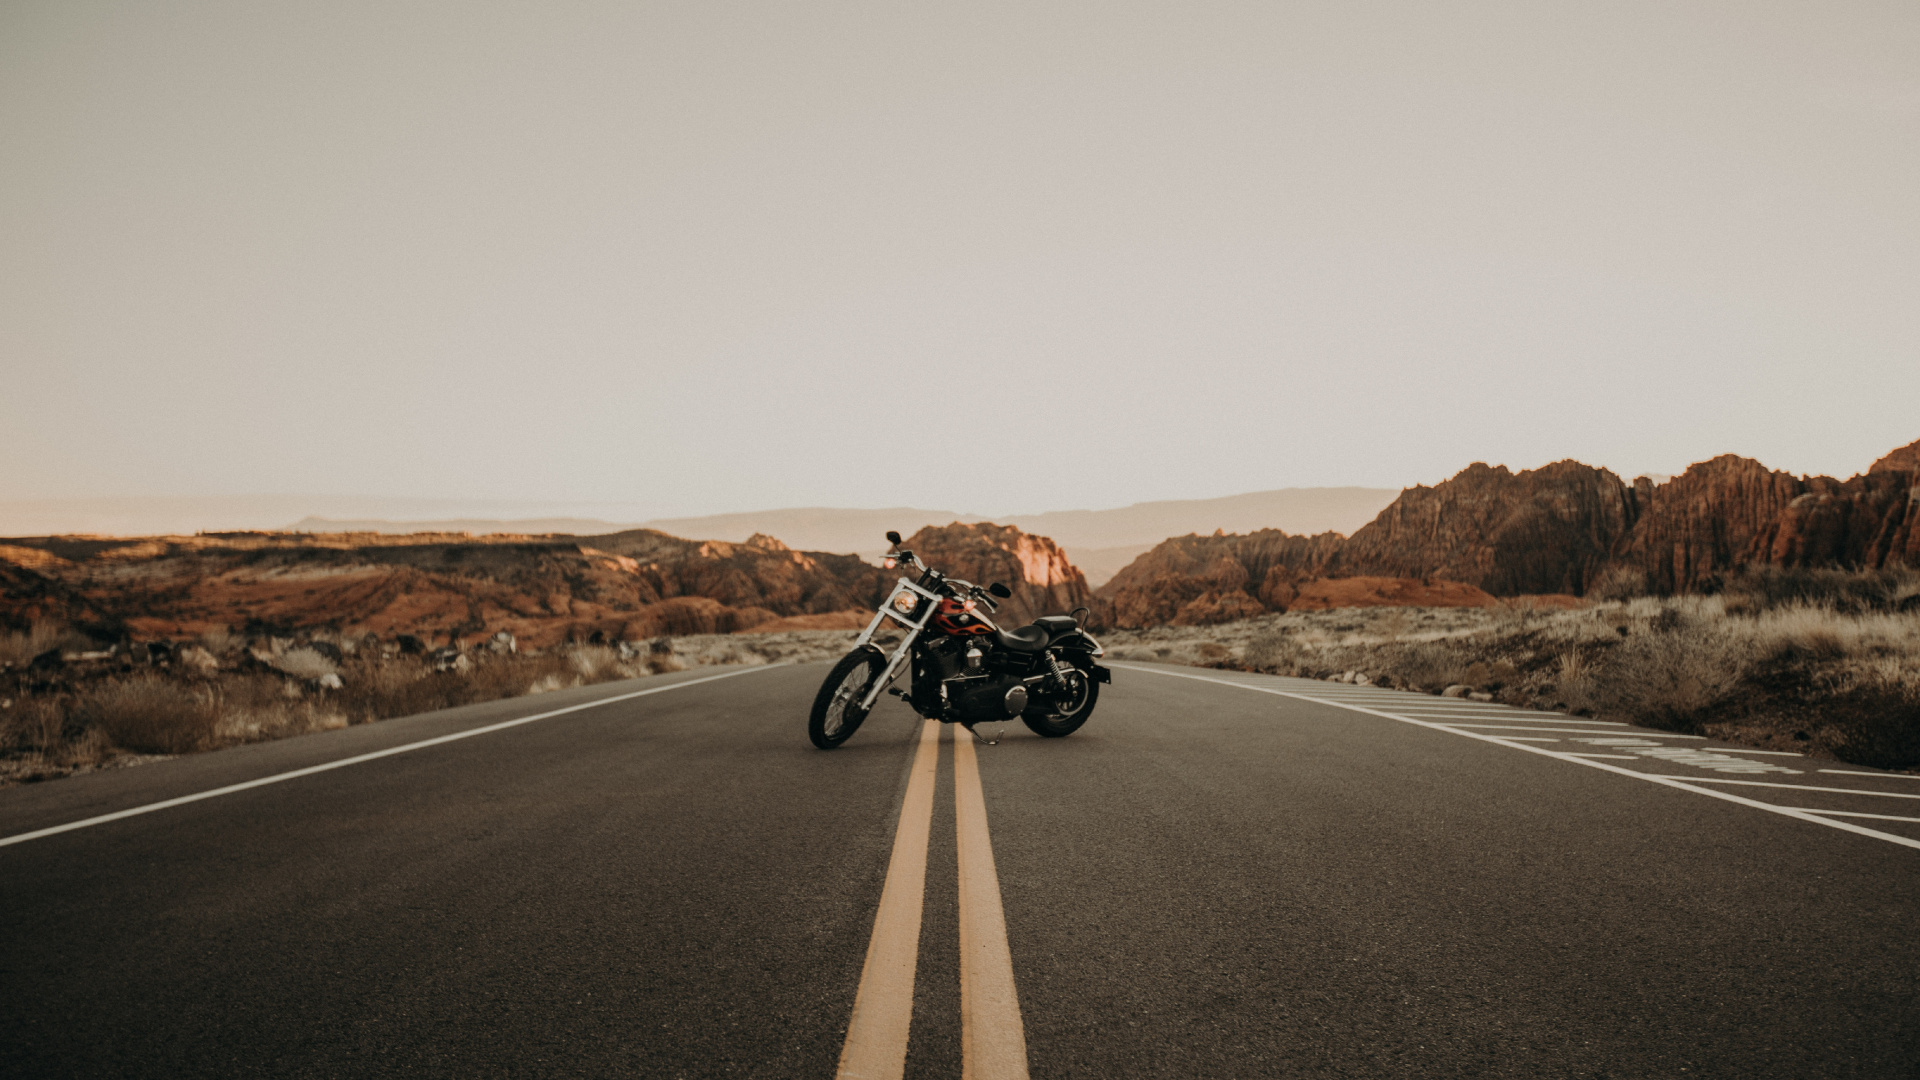 Black and White Motorcycle on Road During Daytime. Wallpaper in 1920x1080 Resolution